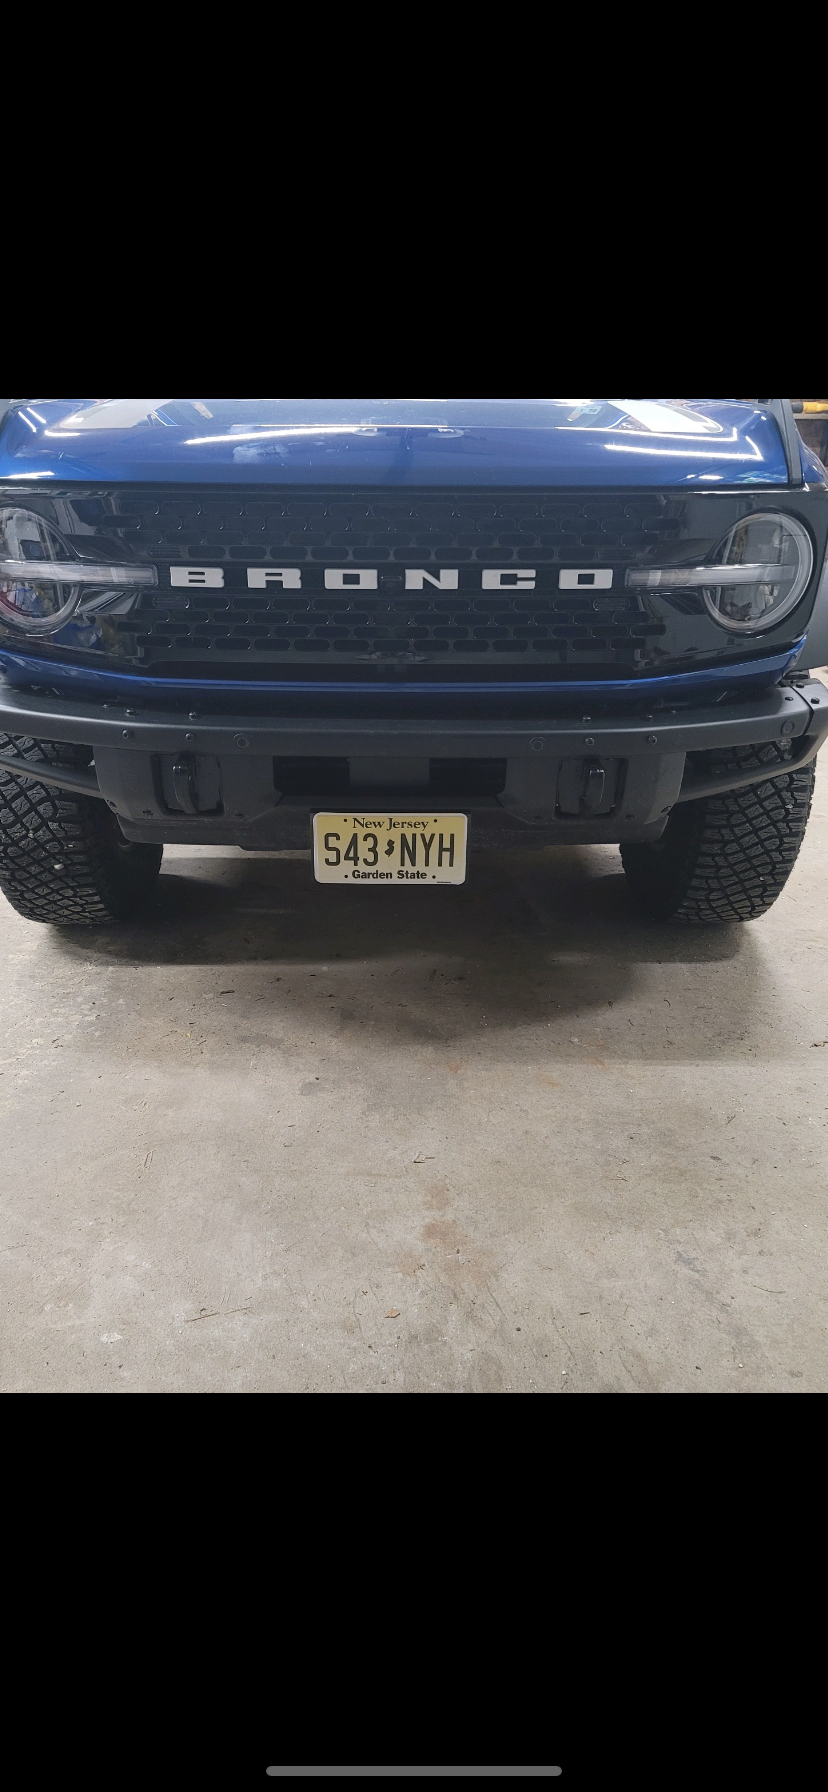 Ford Bronco PRICE DROP - Finally a Front License Plate bracket solution - order yours today IMG_1492